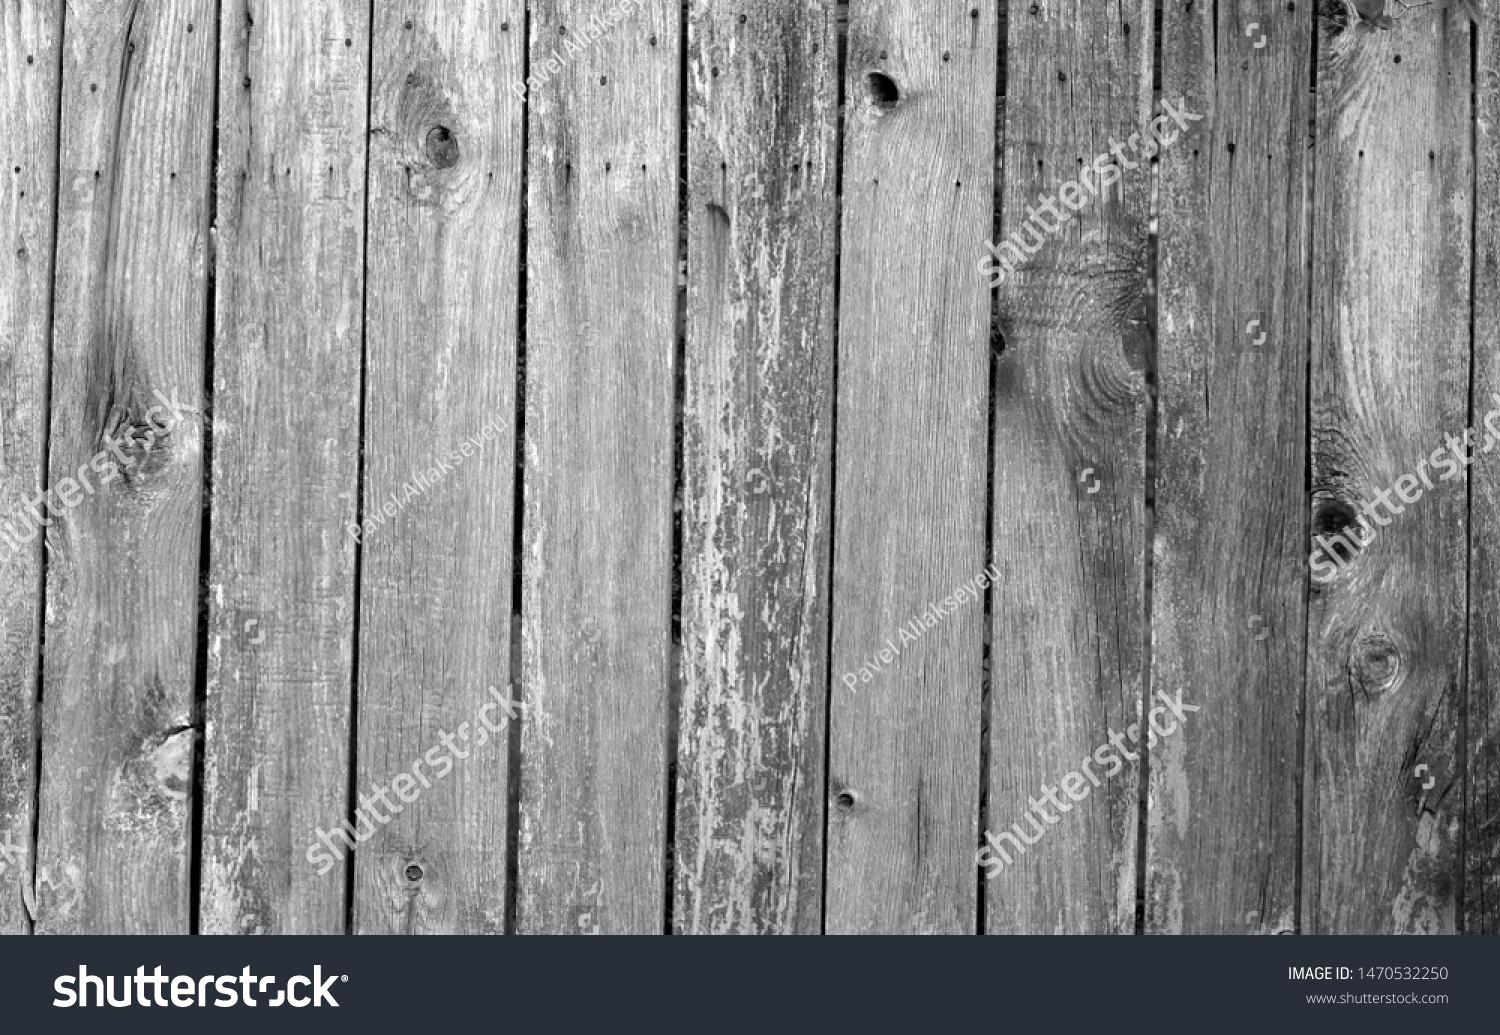 Weathered wooden fence in black and white. Abstract background and texture for design. #1470532250